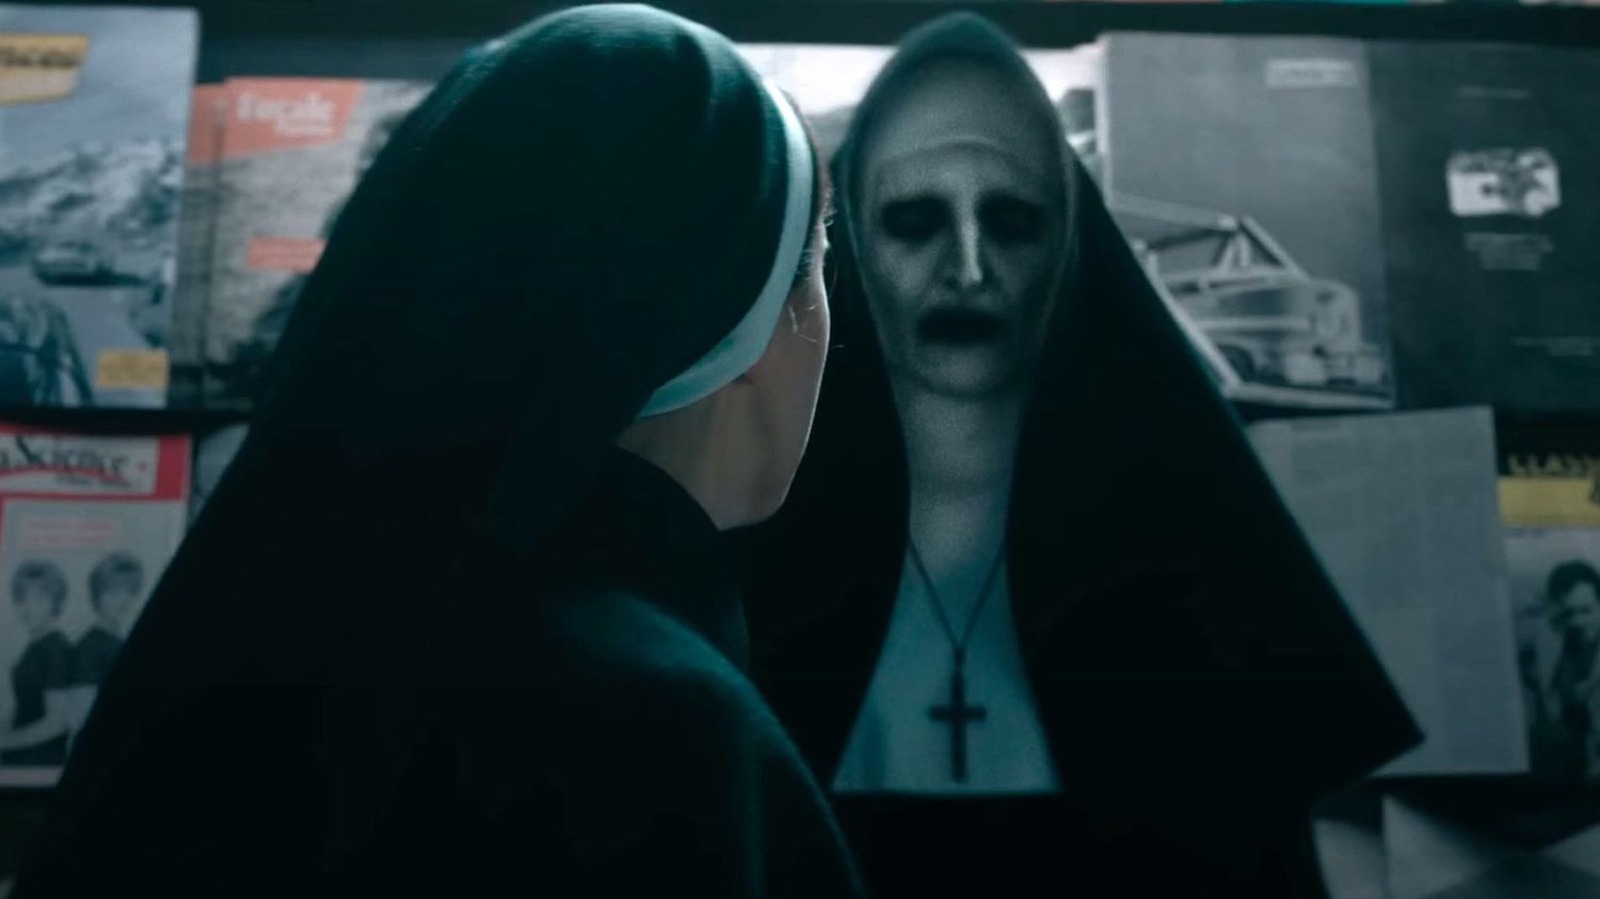 The Nun 2 Director Michael Chaves Says Yeah, You Should Be Looking For Conjuring Clues [Exclusive Interview] – /Film